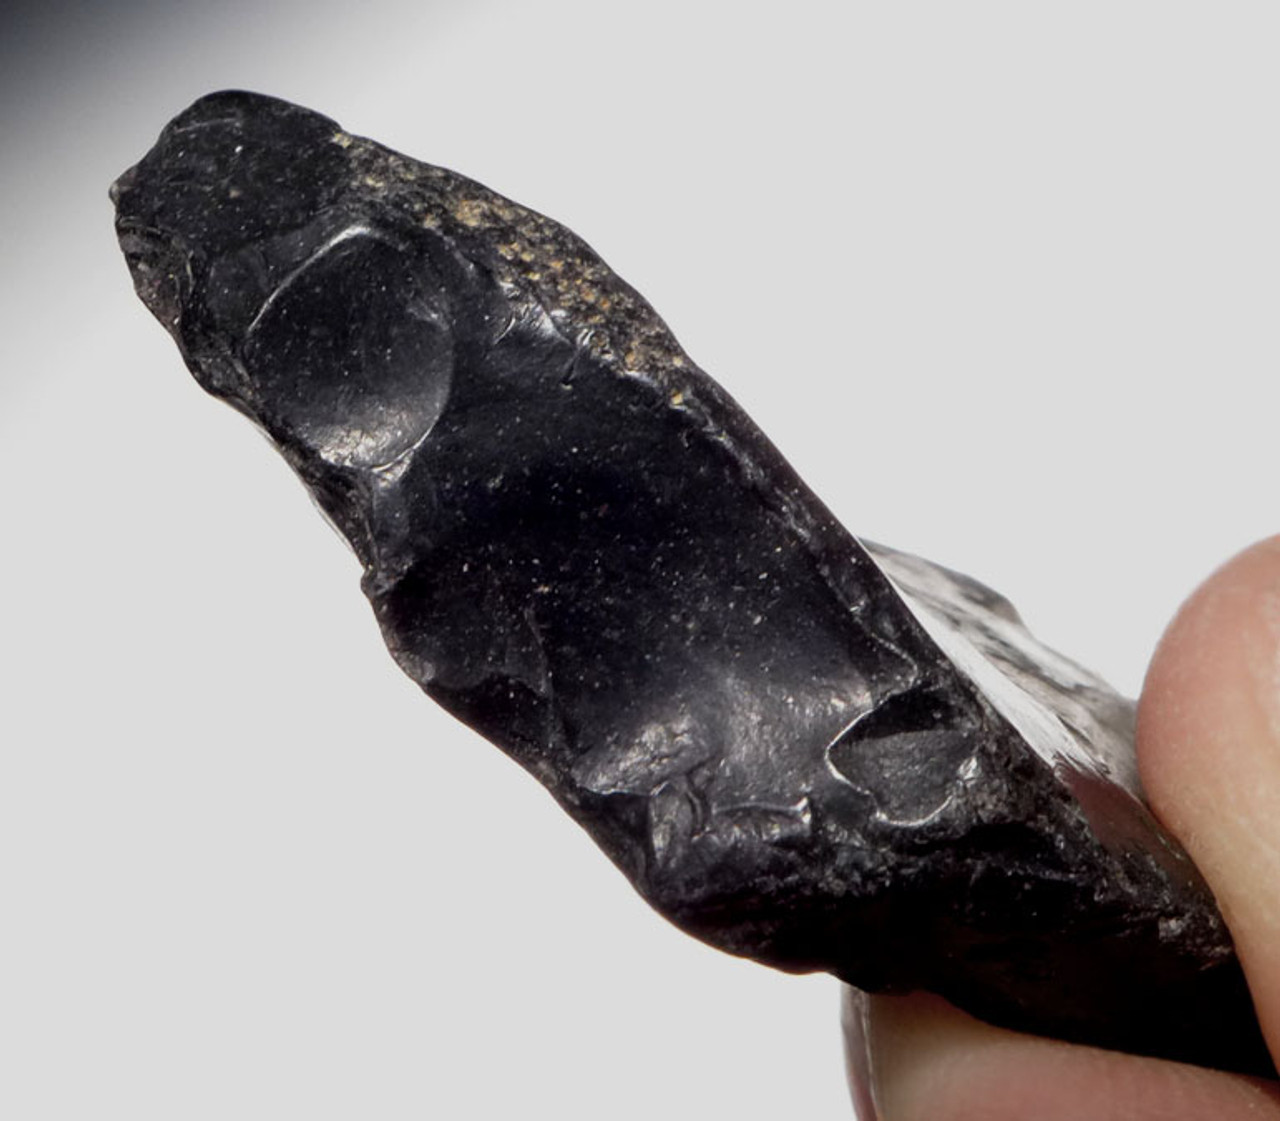 CL002 - RARE CLACTONIAN FLINT FLAKE SCRAPER TOOL FROM NORTH EUROPE MADE BY HOMO ERECTUS